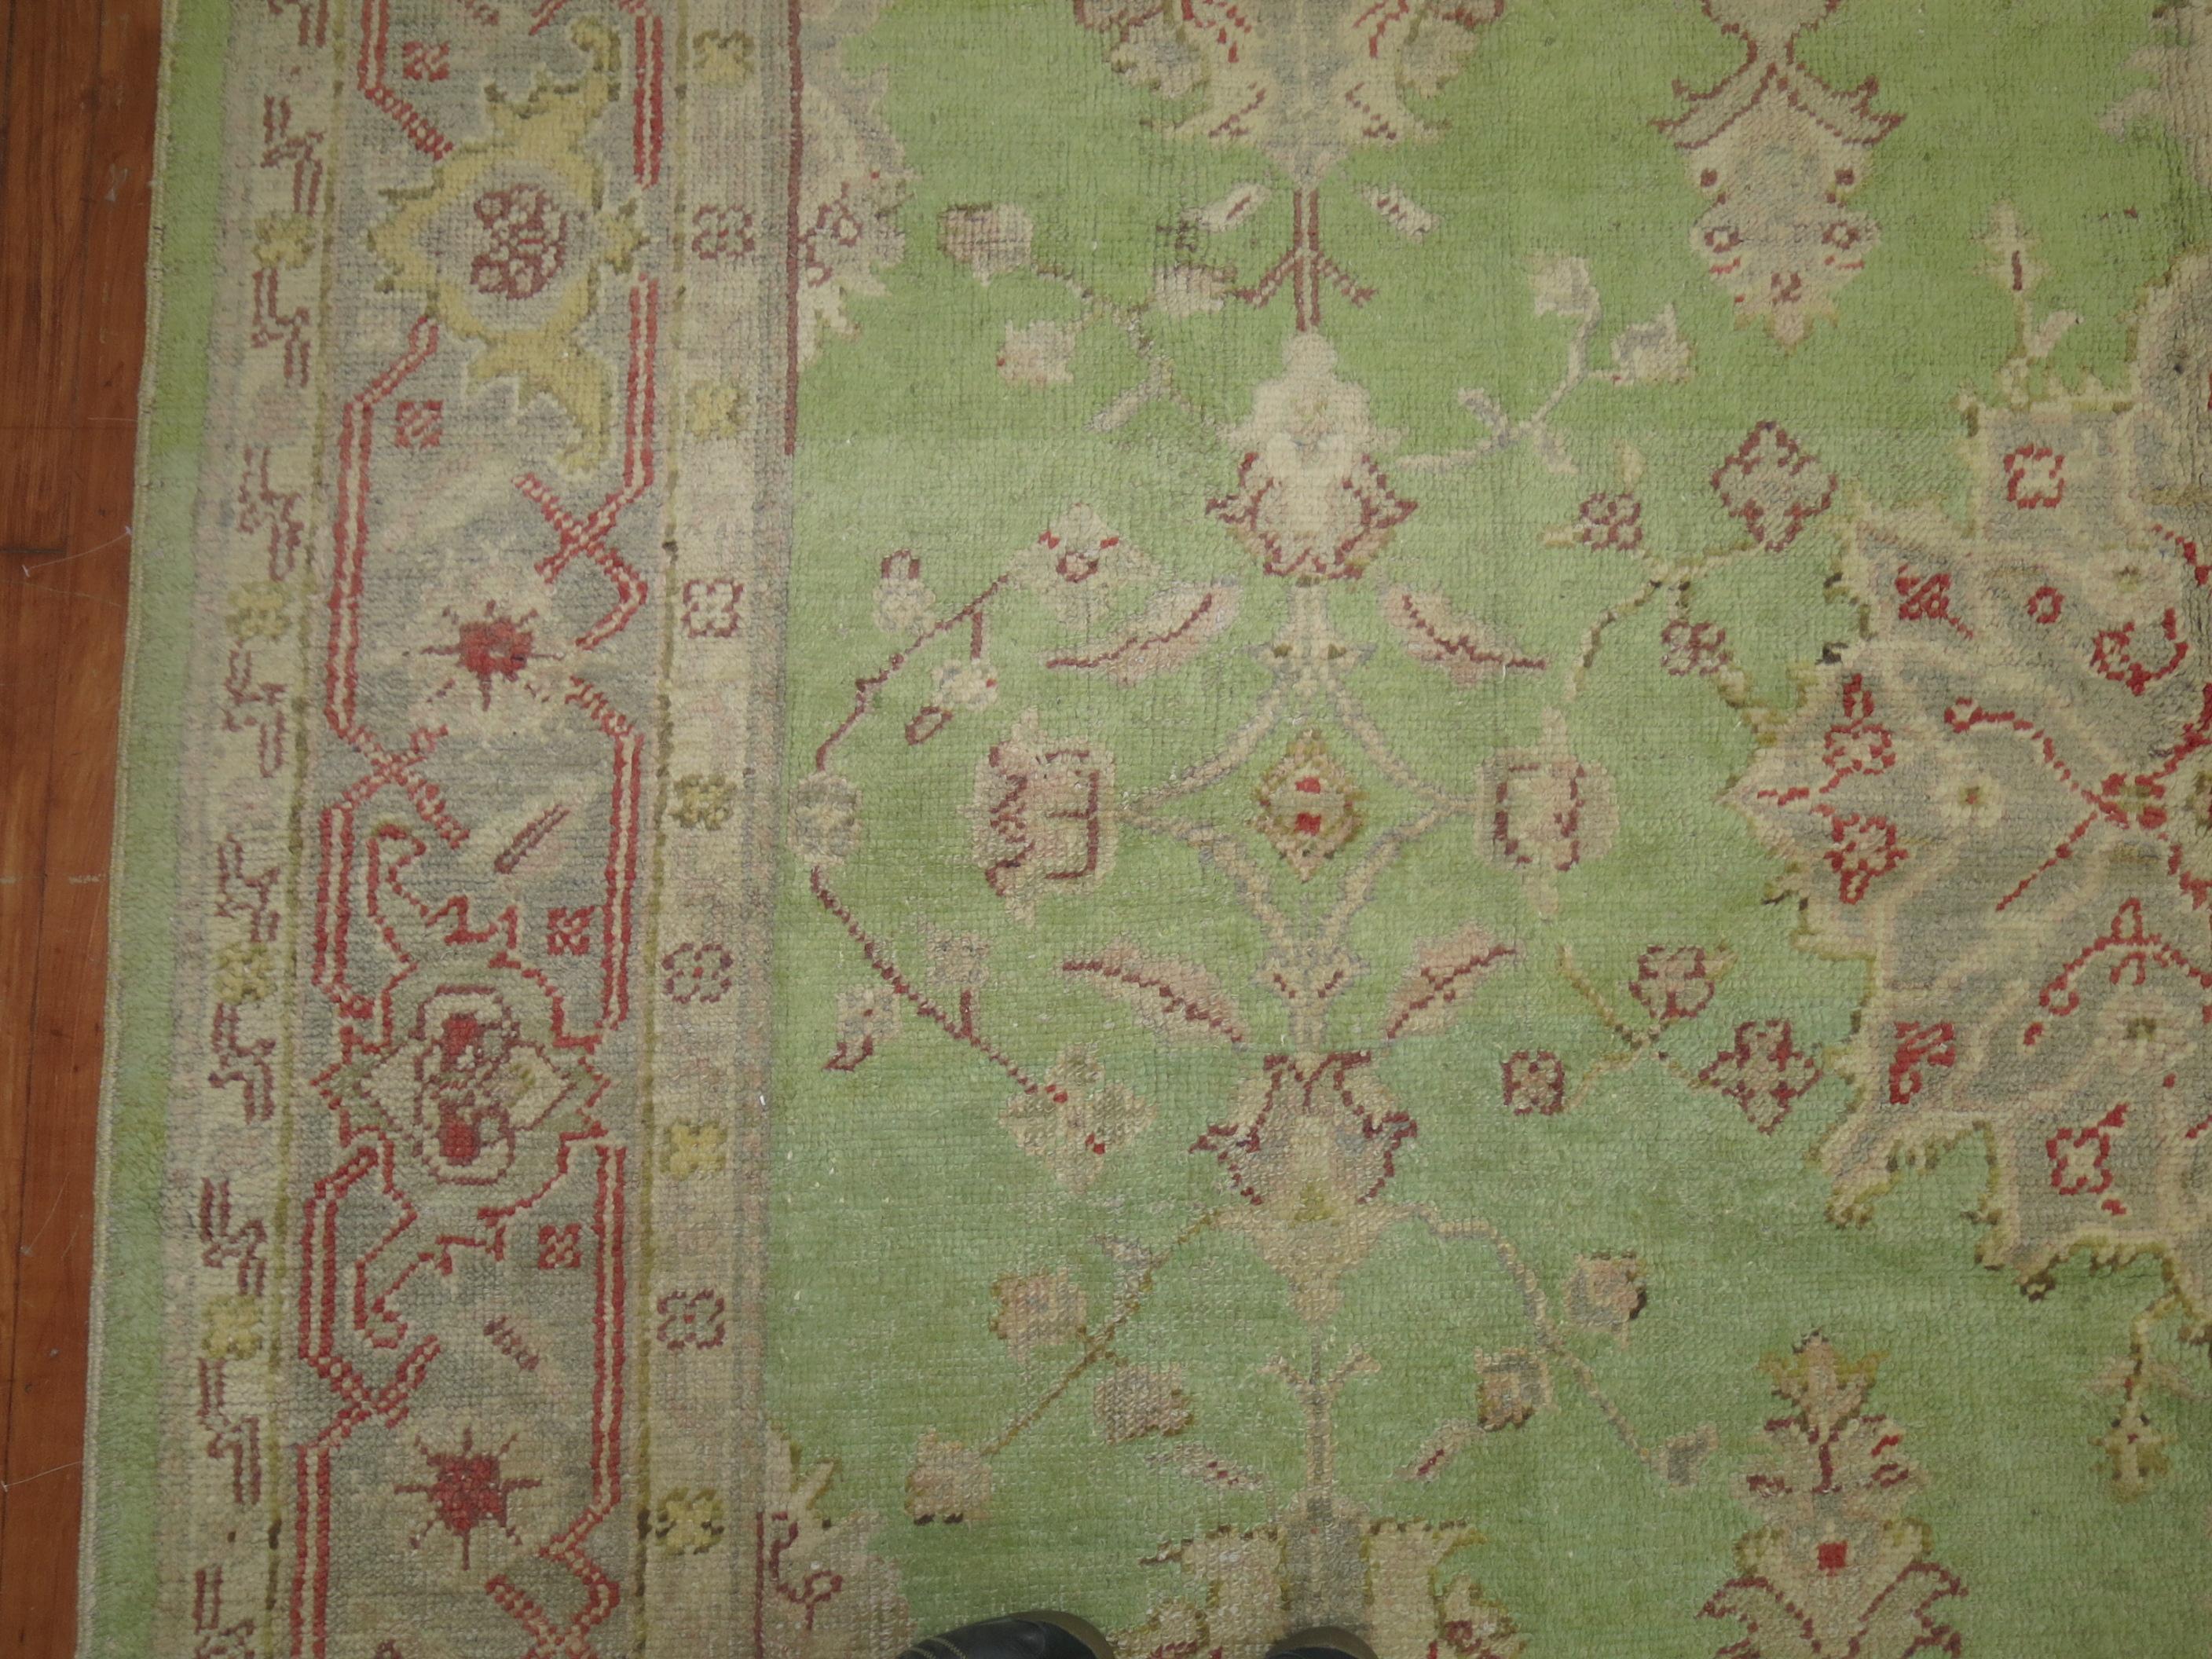 Hand-Woven Mint Green Room Size Antique Turkish Oushak Carpet, 20th Century For Sale